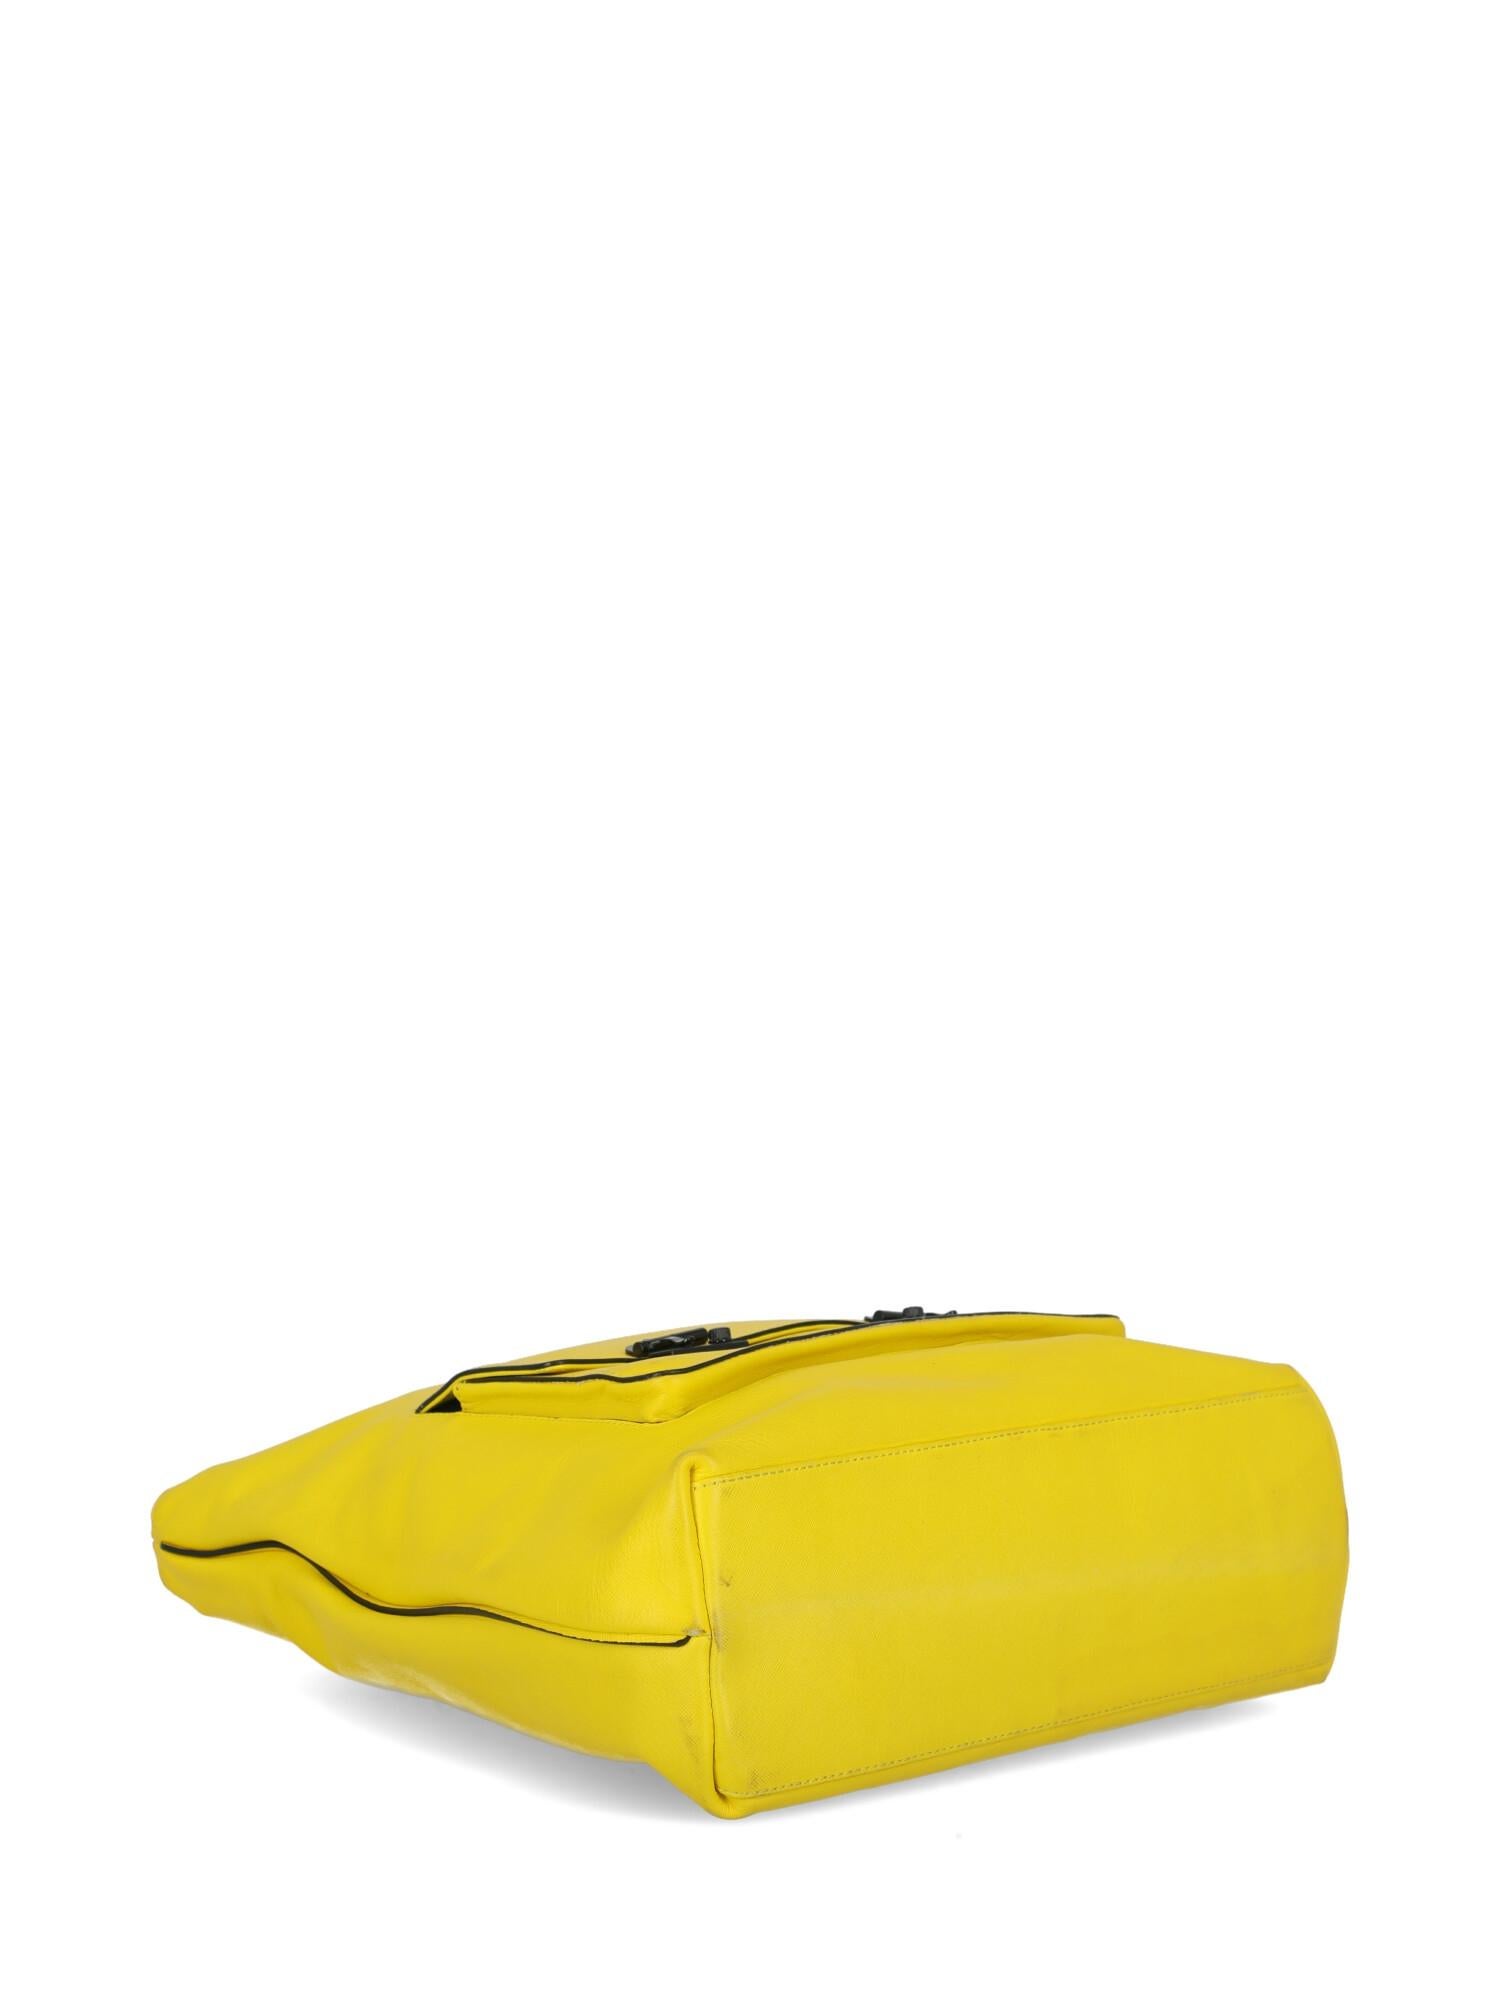 Mcq Woman Shoulder bag Yellow Leather In Fair Condition For Sale In Milan, IT